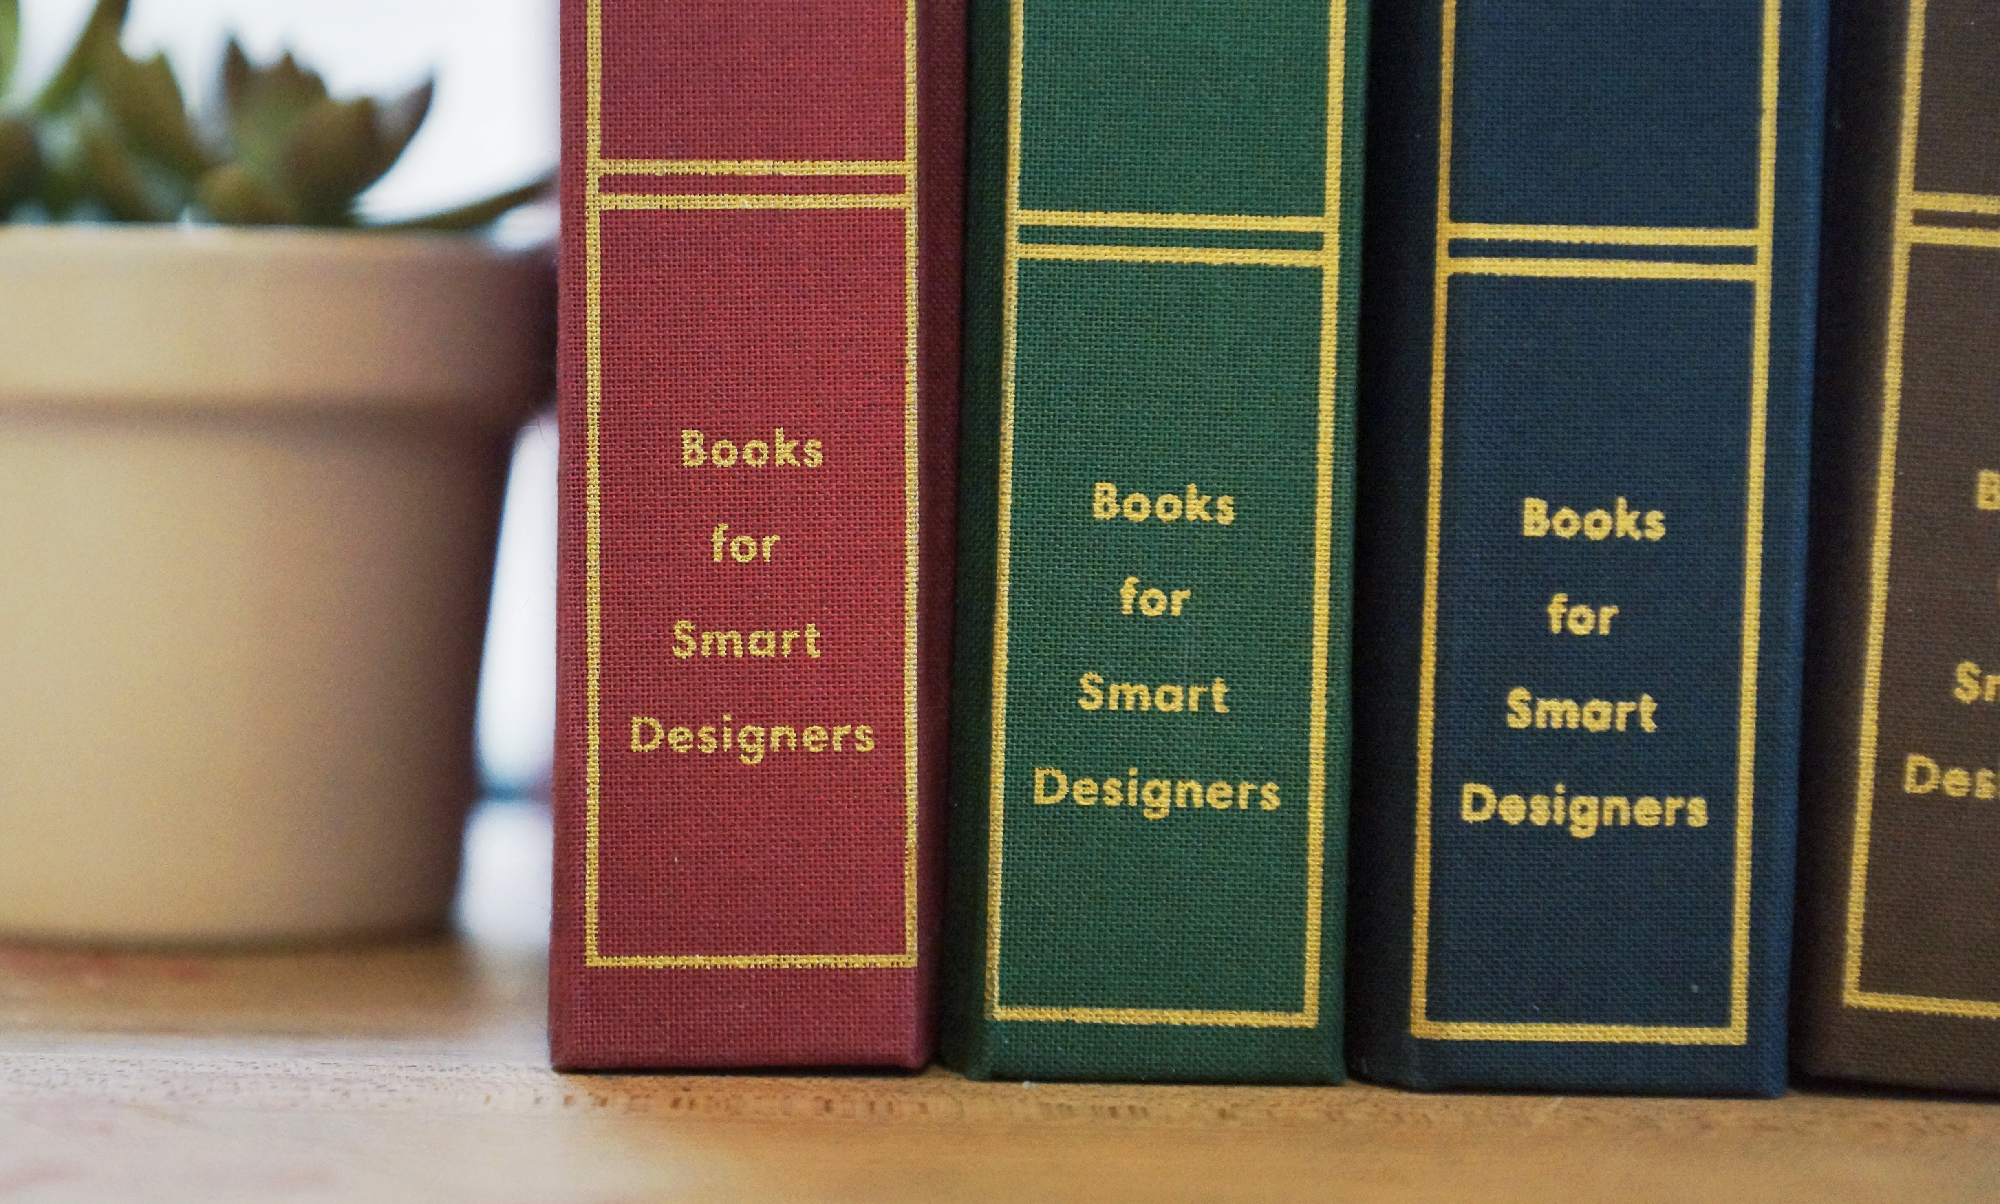 Books for Smart Designers full collection